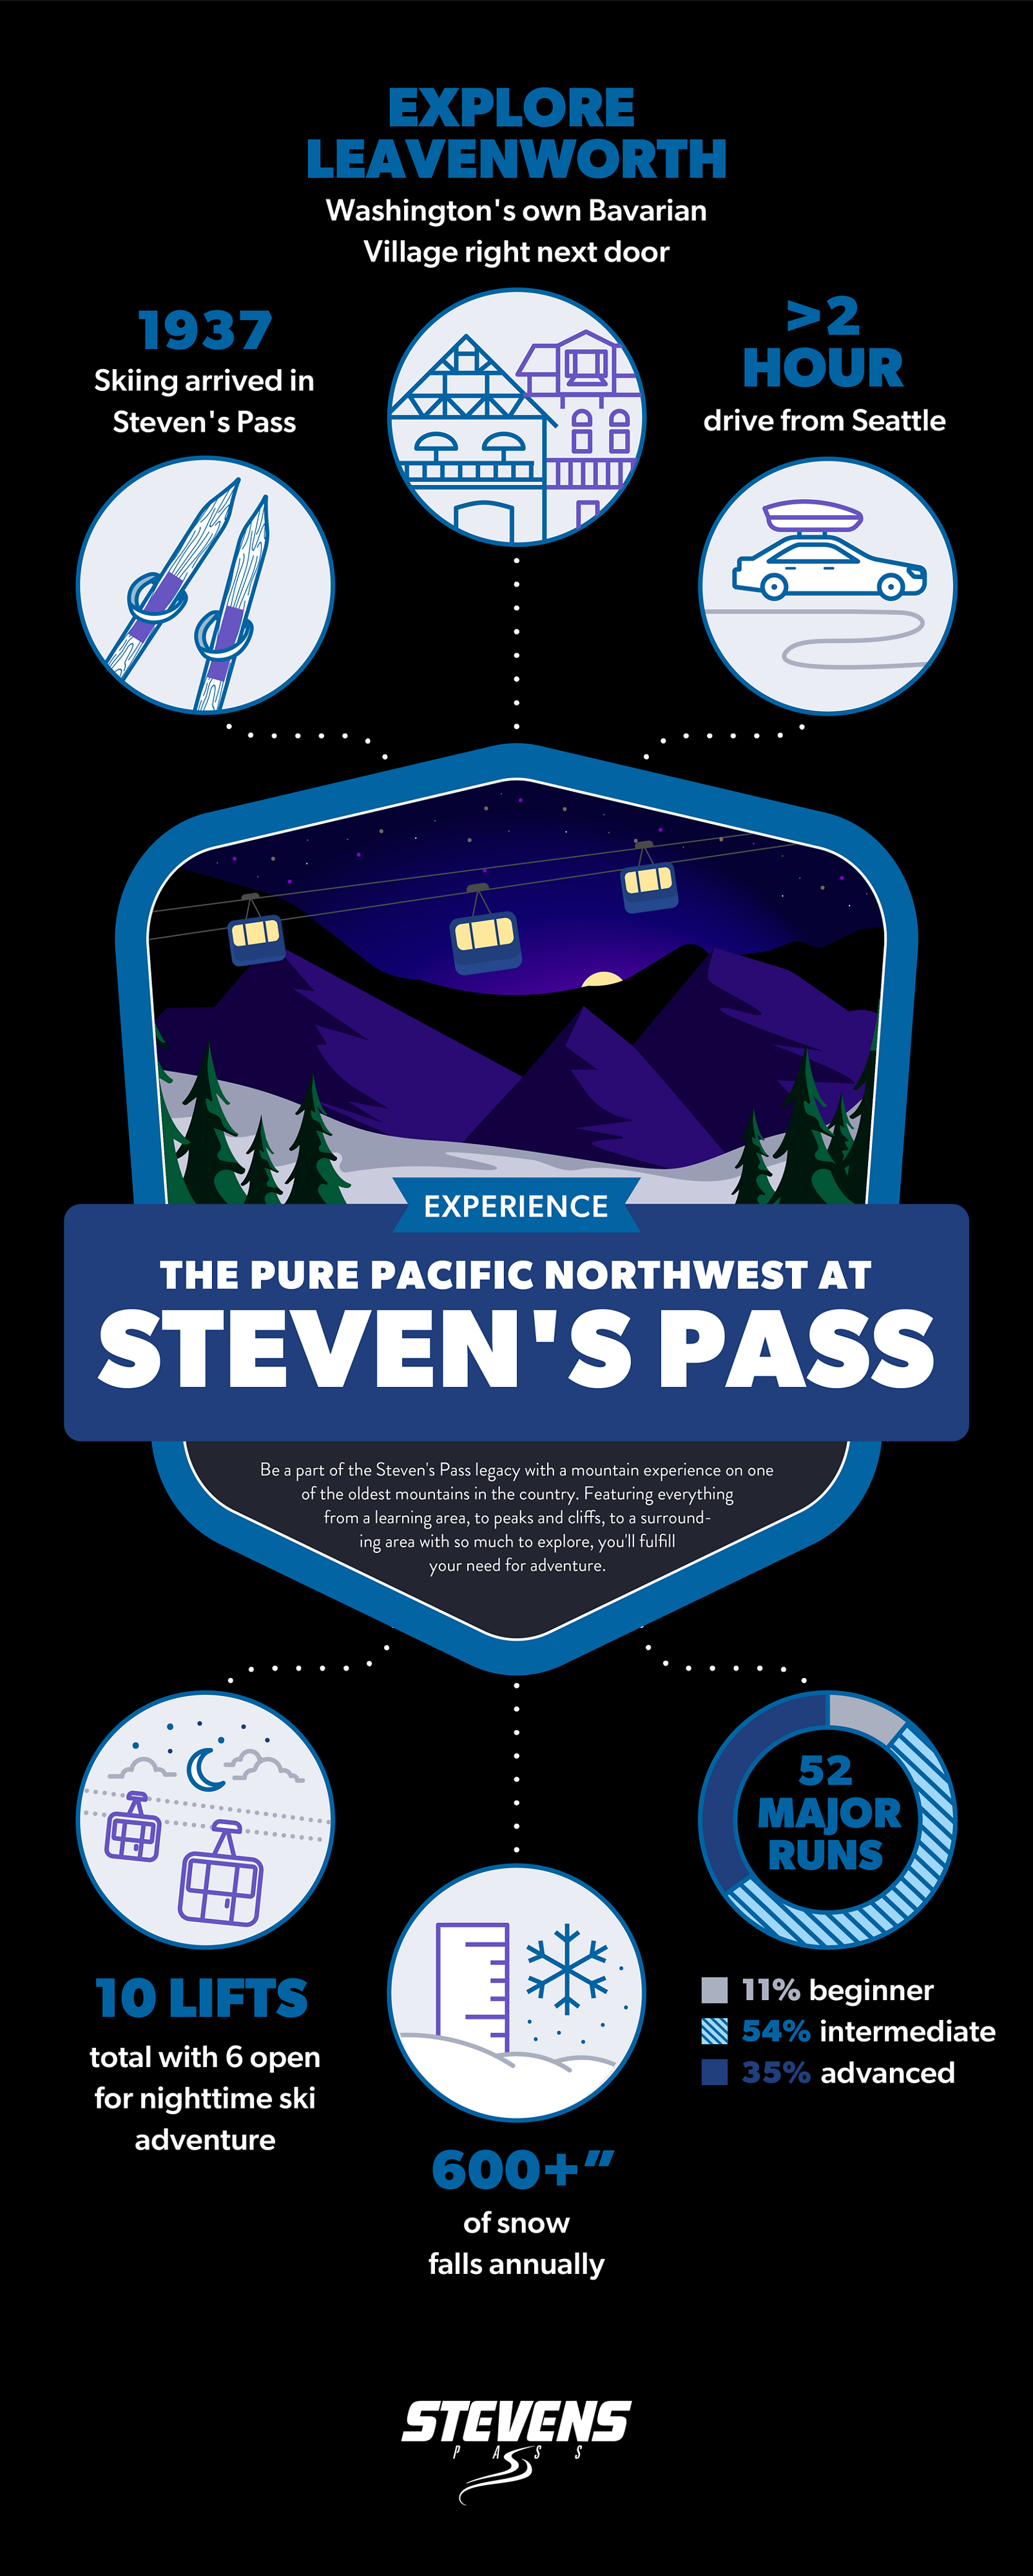 An infographic about Stevens Pass Ski Resort featuring facts such as: 600+ inches of snow falls annually, 6 lifts open for night skiing and the 52 major runs.